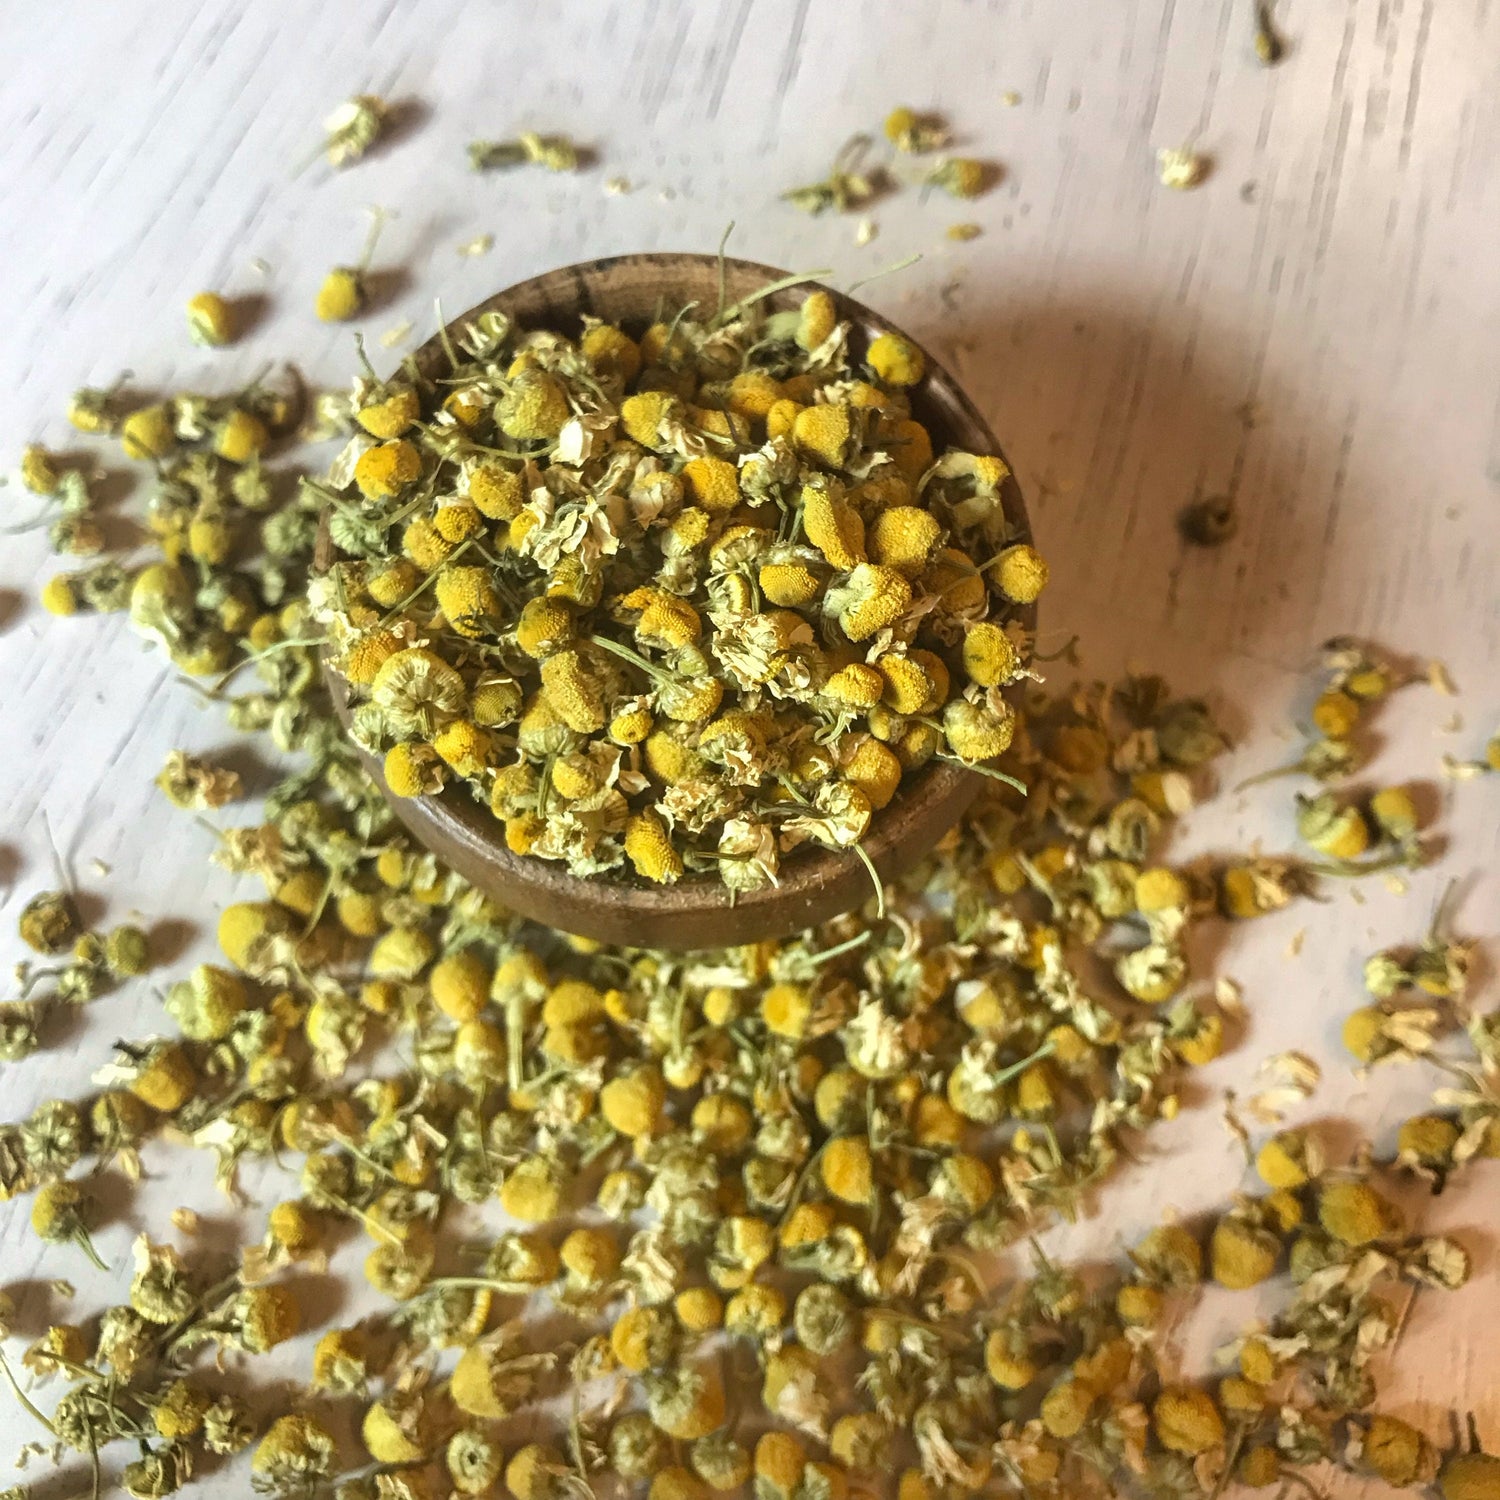 Top view of a bowl full of dried chamomile flowers, showcasing the natural yellow hues and quality of the organic blossoms.